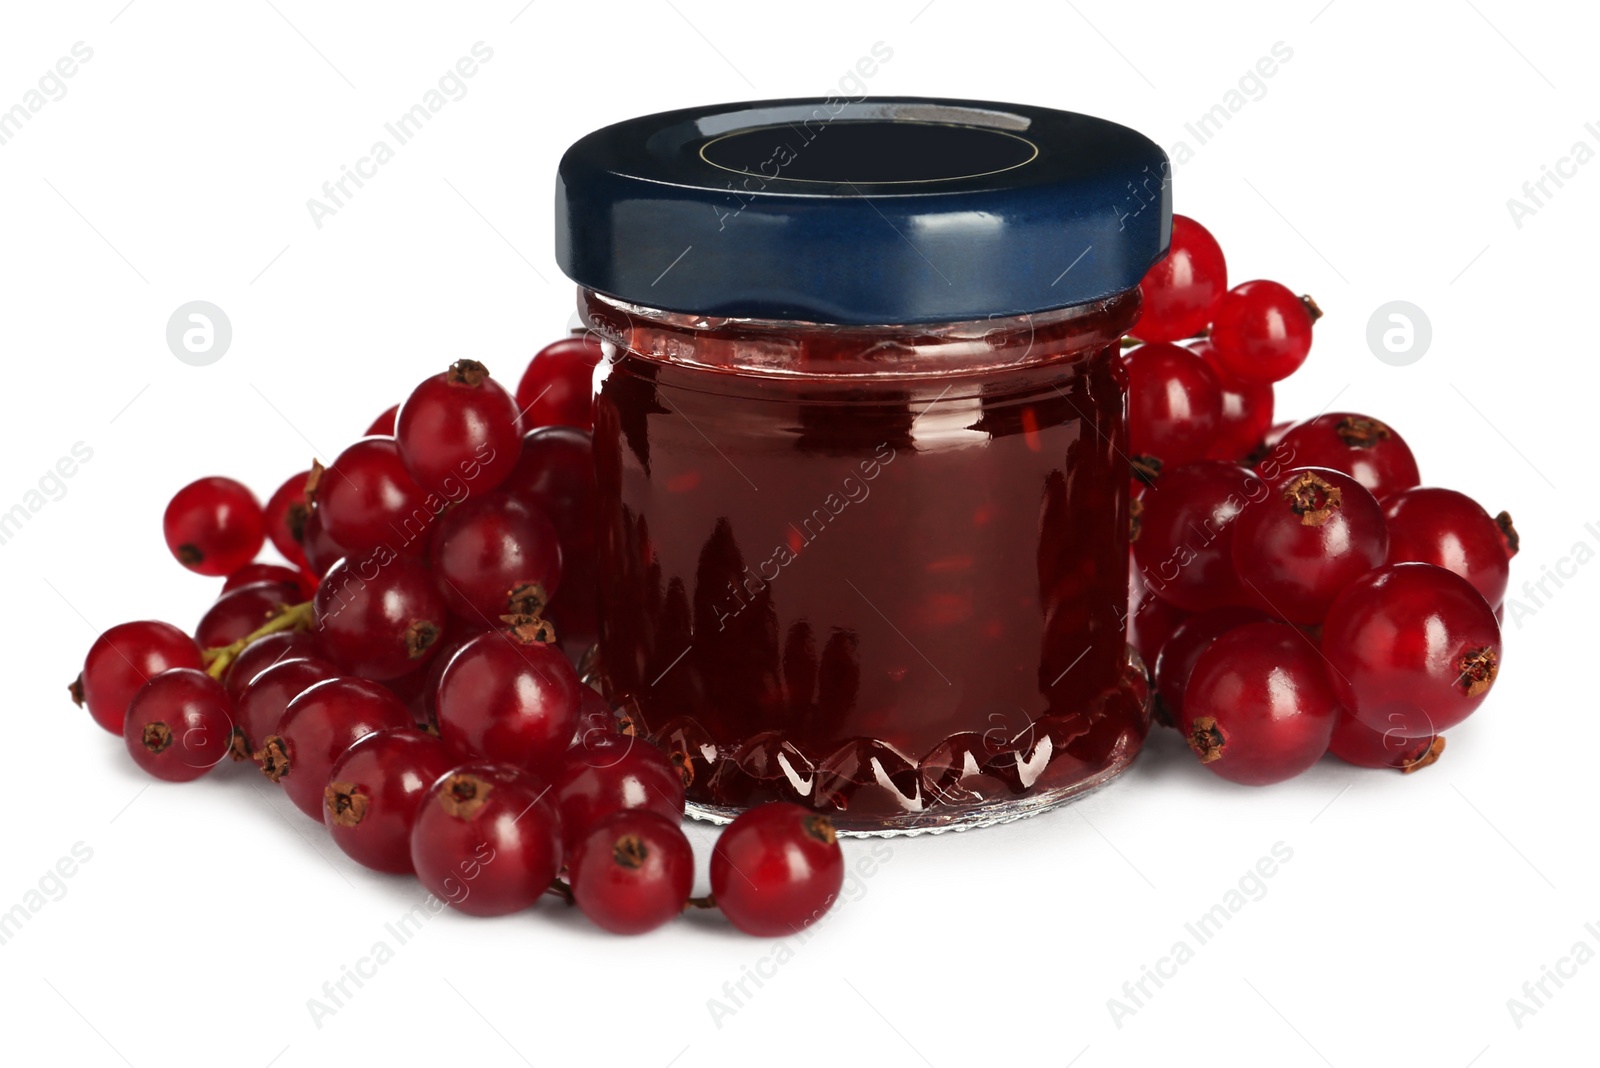 Photo of Jar with sweet jam and fresh berries on white background